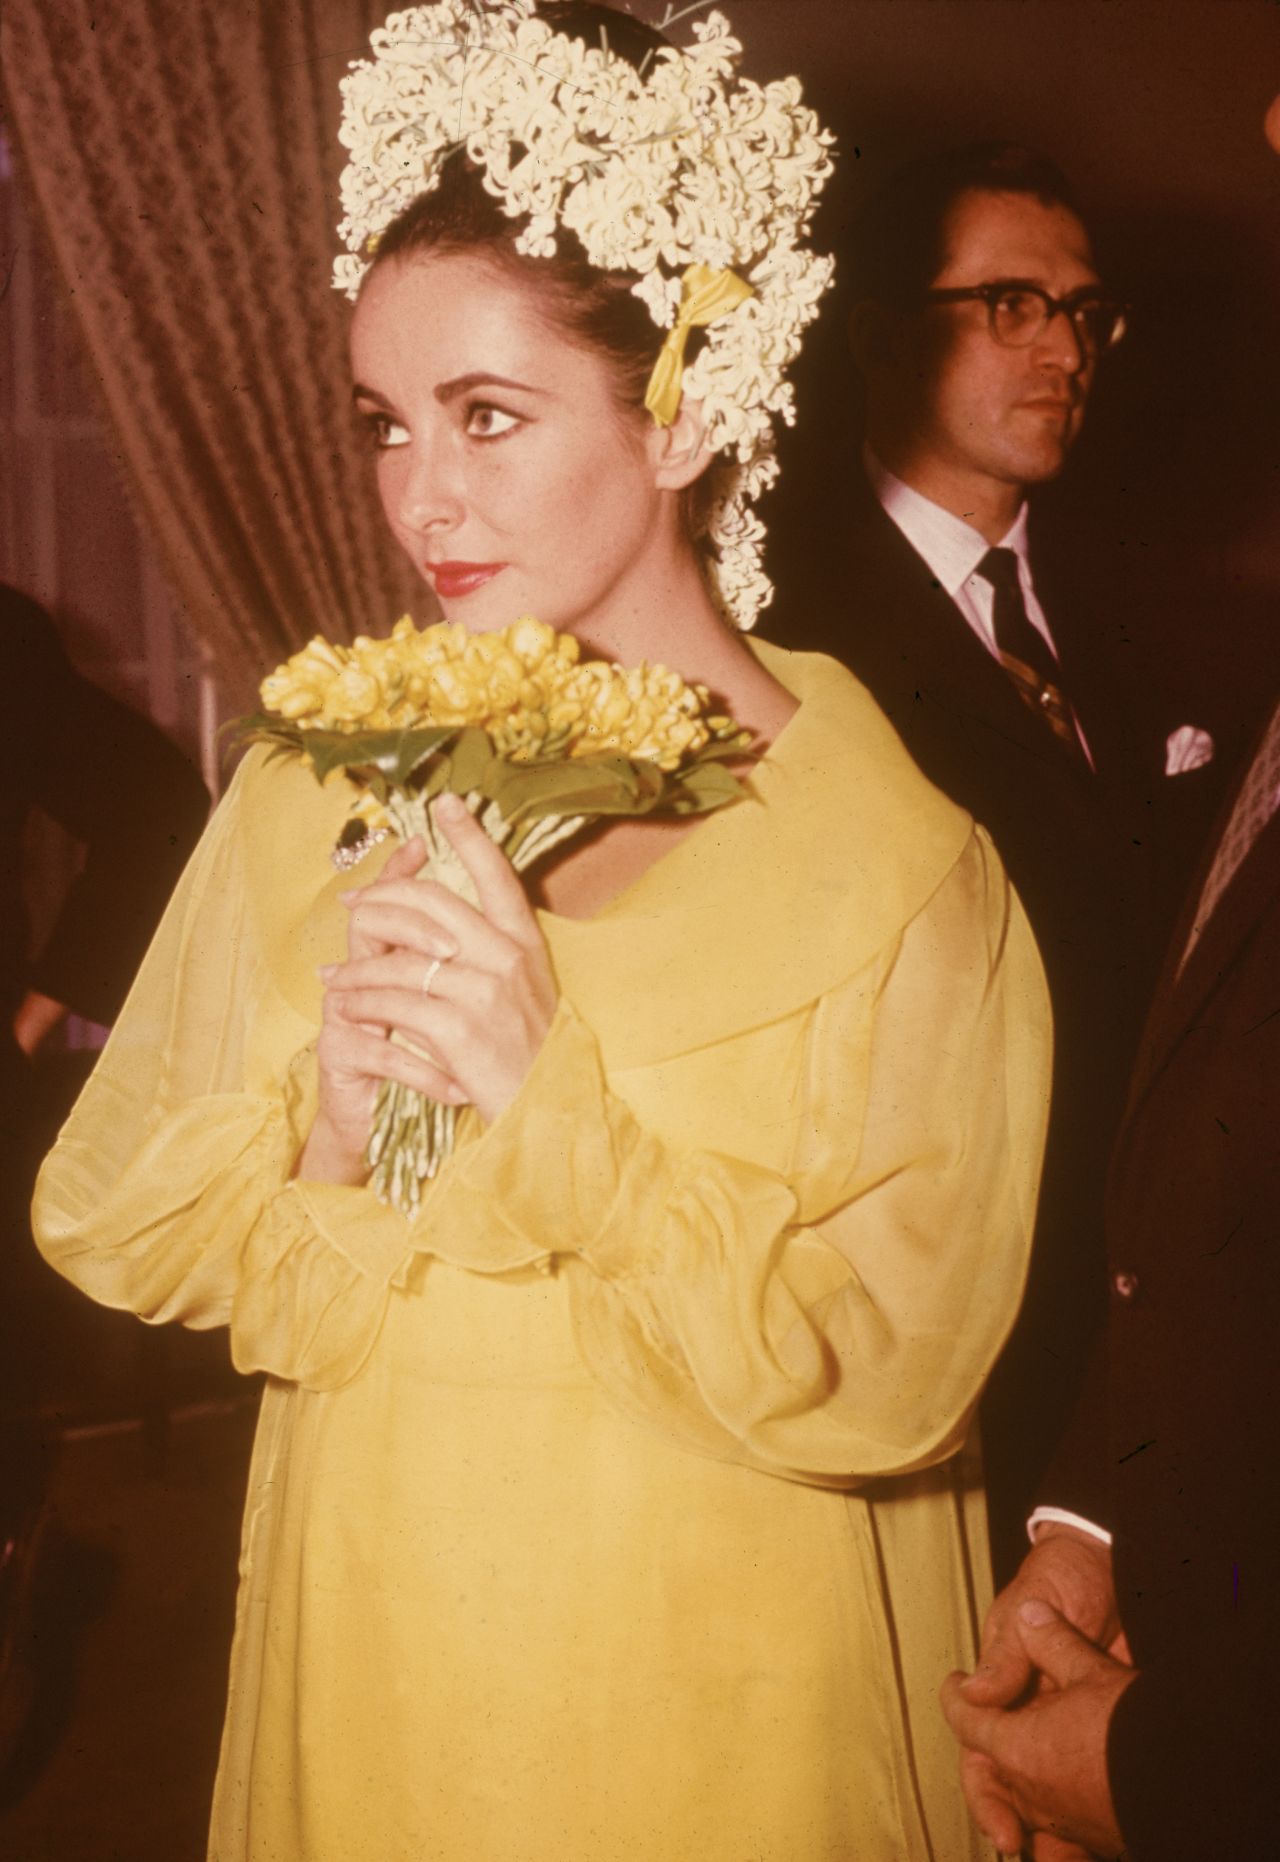 Elizabeth Taylor wore a striking yellow dress and floral headdress for her 1964 wedding to Richard Burton.